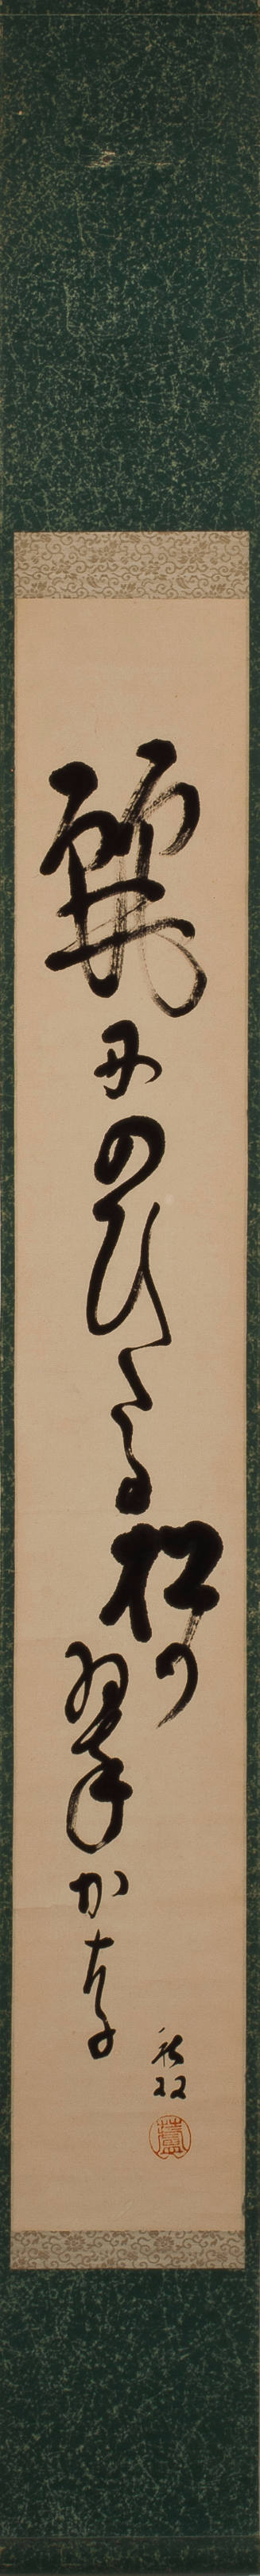 Calligraphy Hanging Scroll